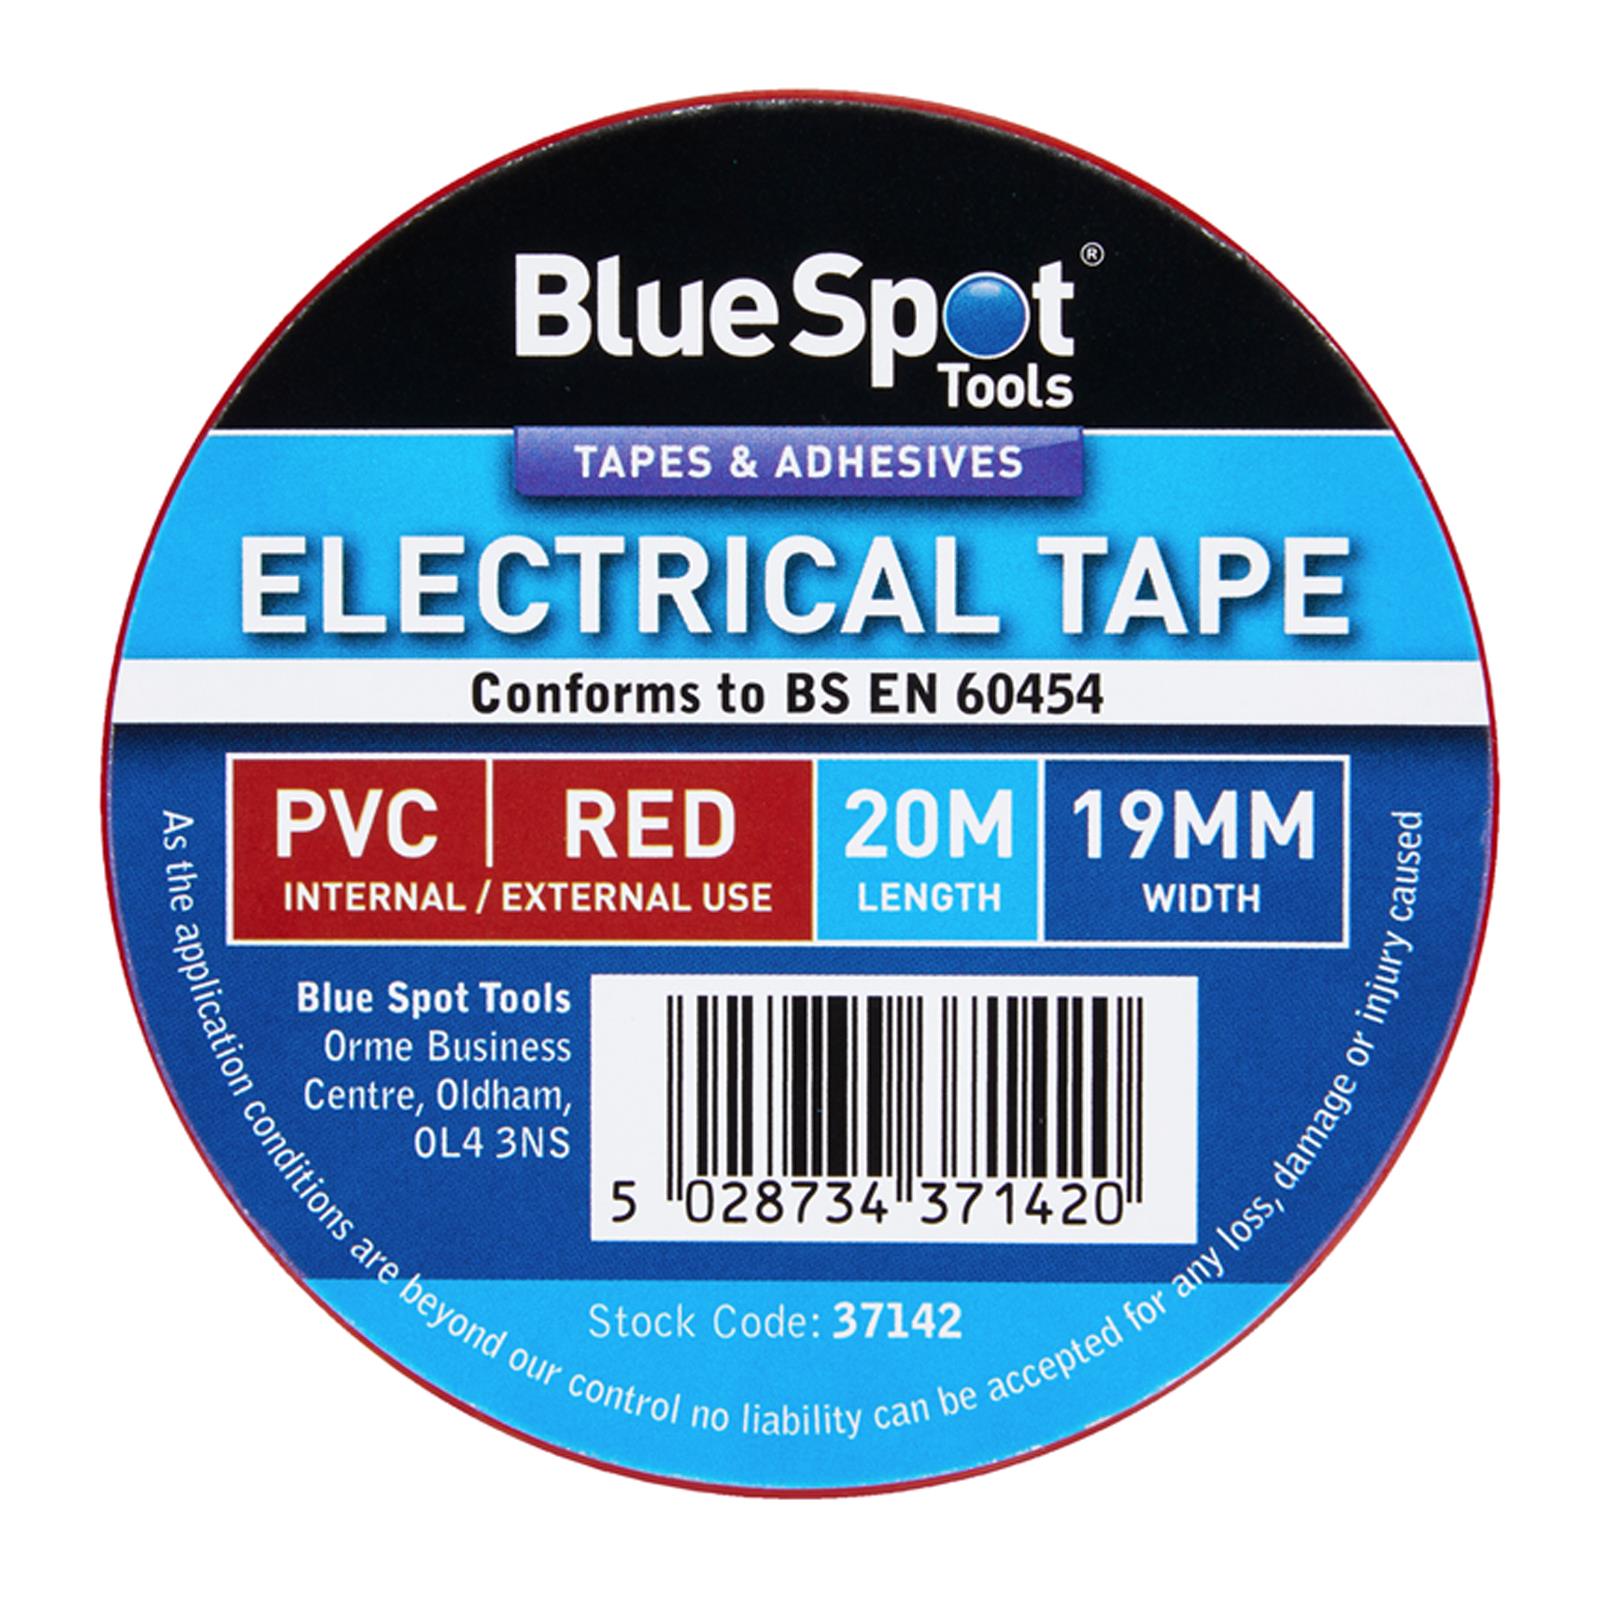 BlueSpot Electrical Insulation Tape Red PVC 19mm x 20m